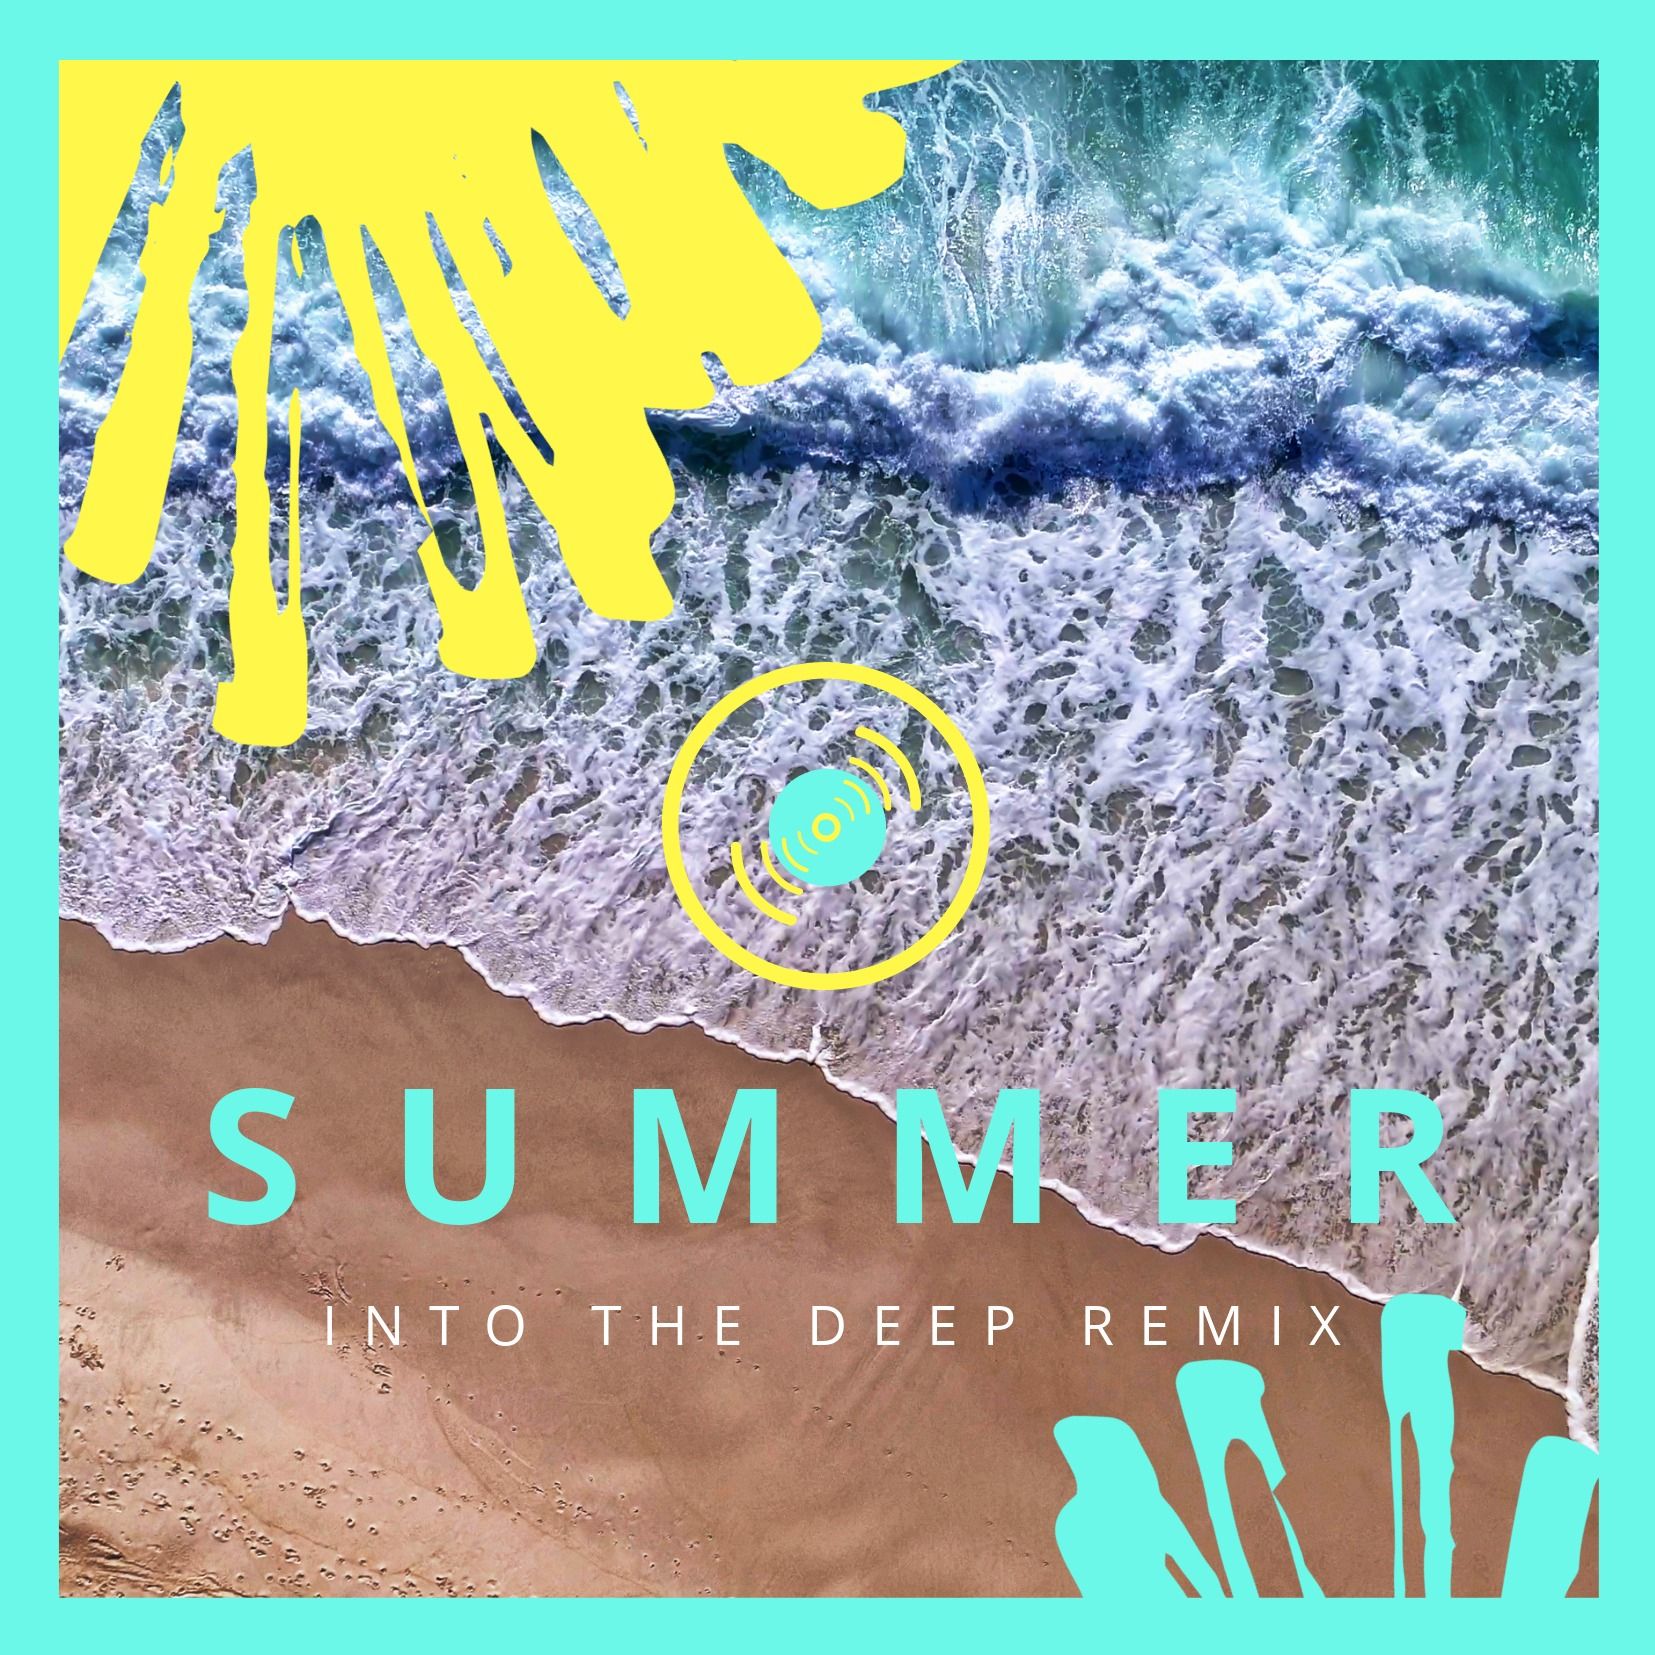 Summer paint design over a beach with waves - Bold and bright colors in album cover design - Image